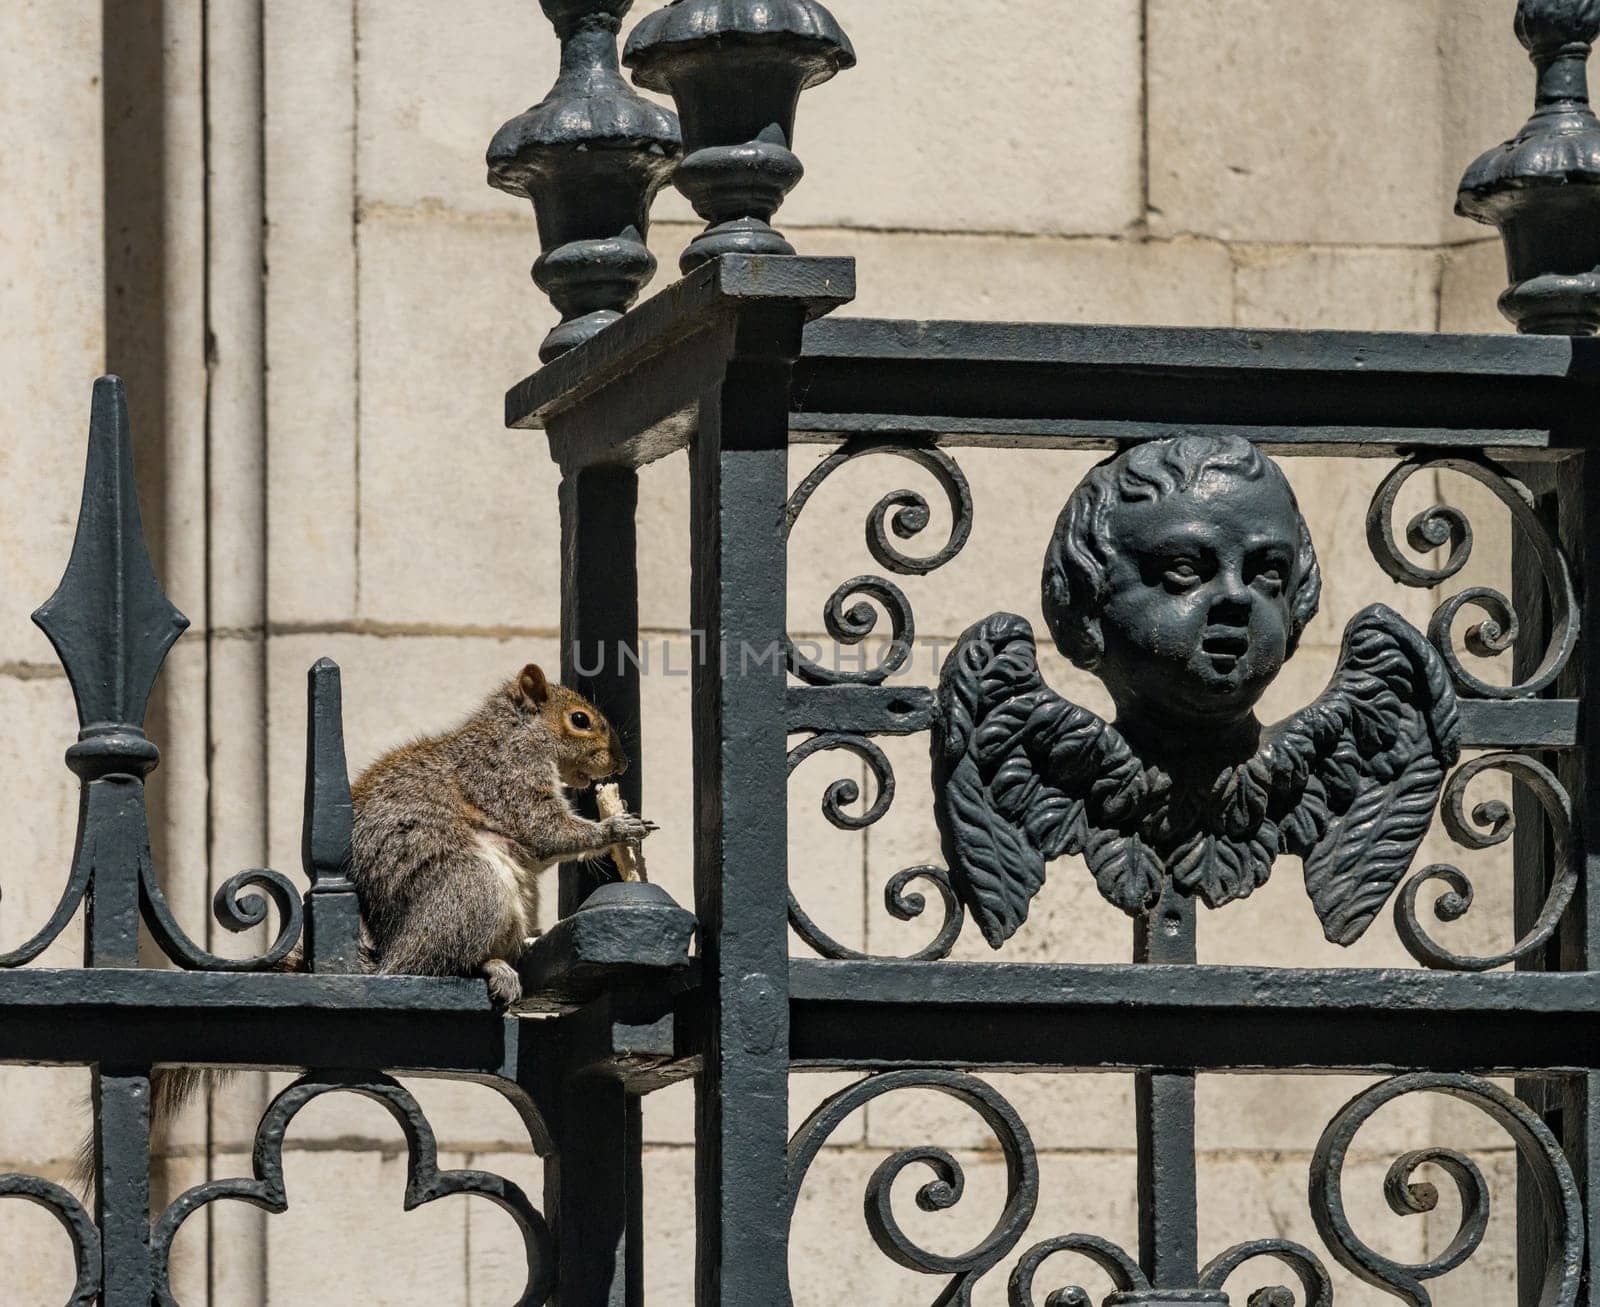 Small english gray squirrel nibbling bread on ironwork fence surrounding church in London